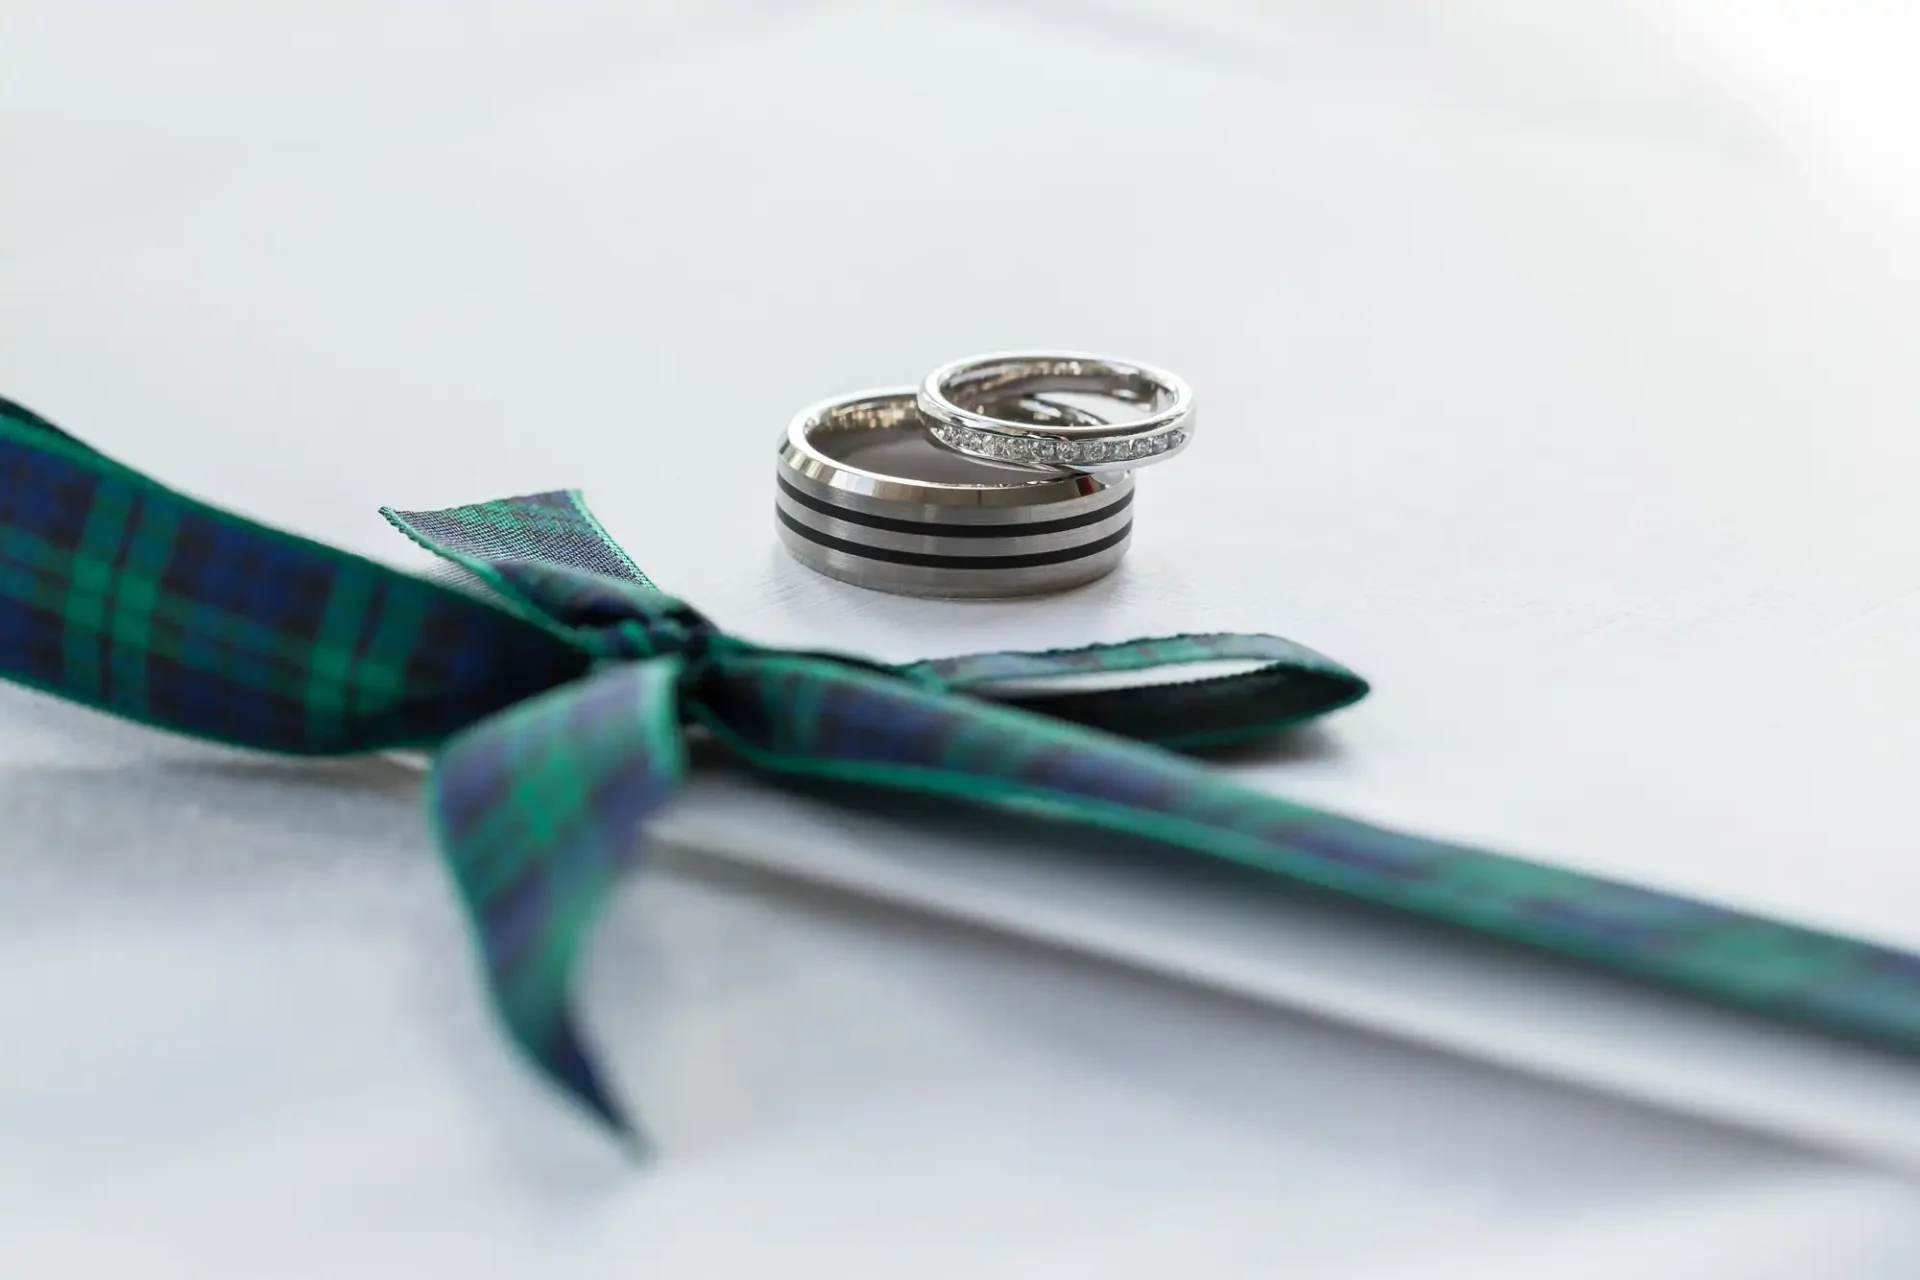 Two wedding rings stacked beside a green and blue tartan bow tie on a white fabric background.